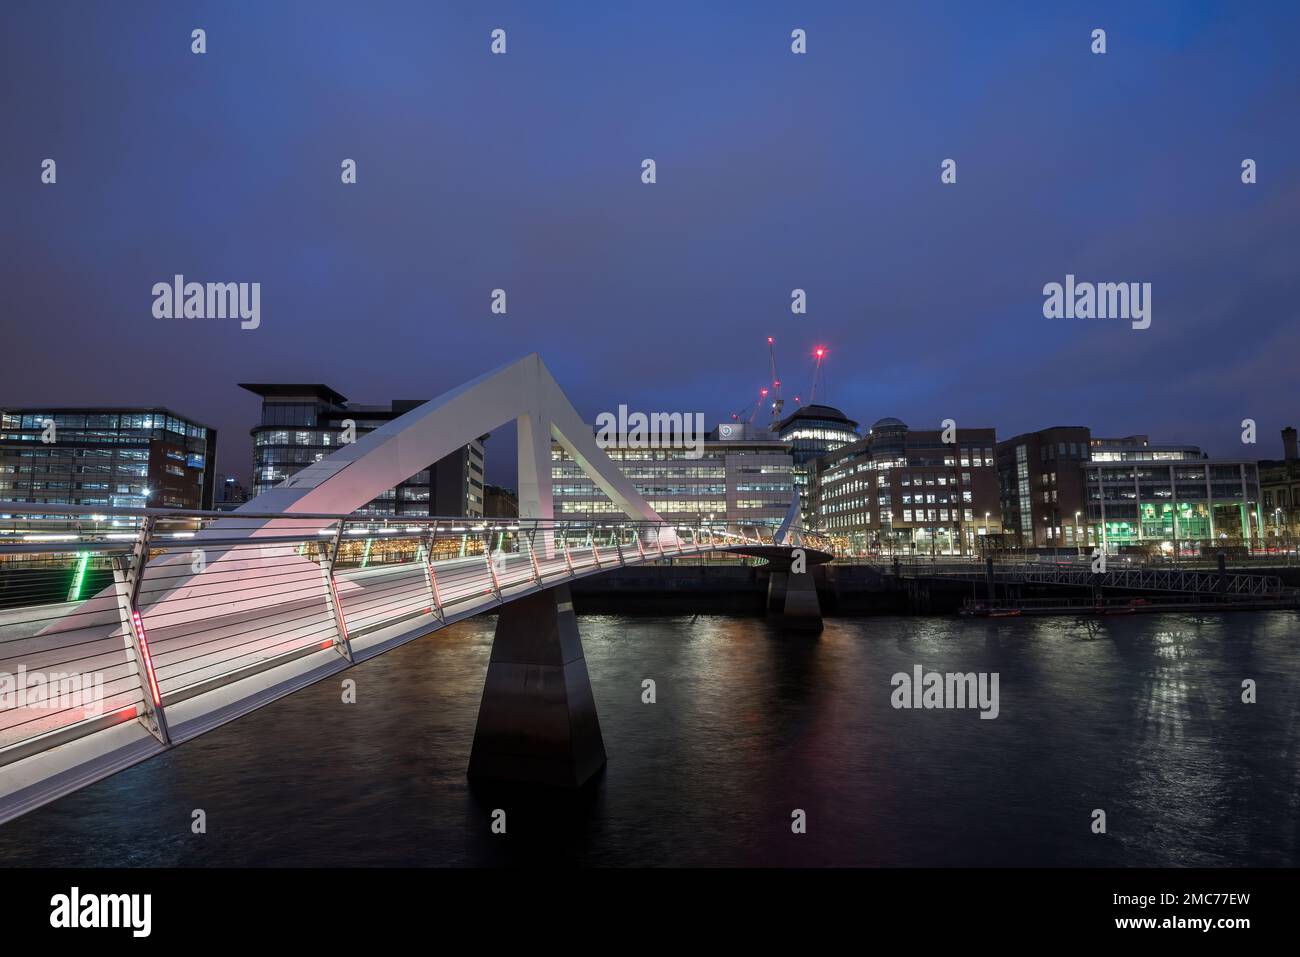 Night picture of the Tradeston (Squiggly) Bridge over the River Clyde, Glasgow, Scotland Stock Photo